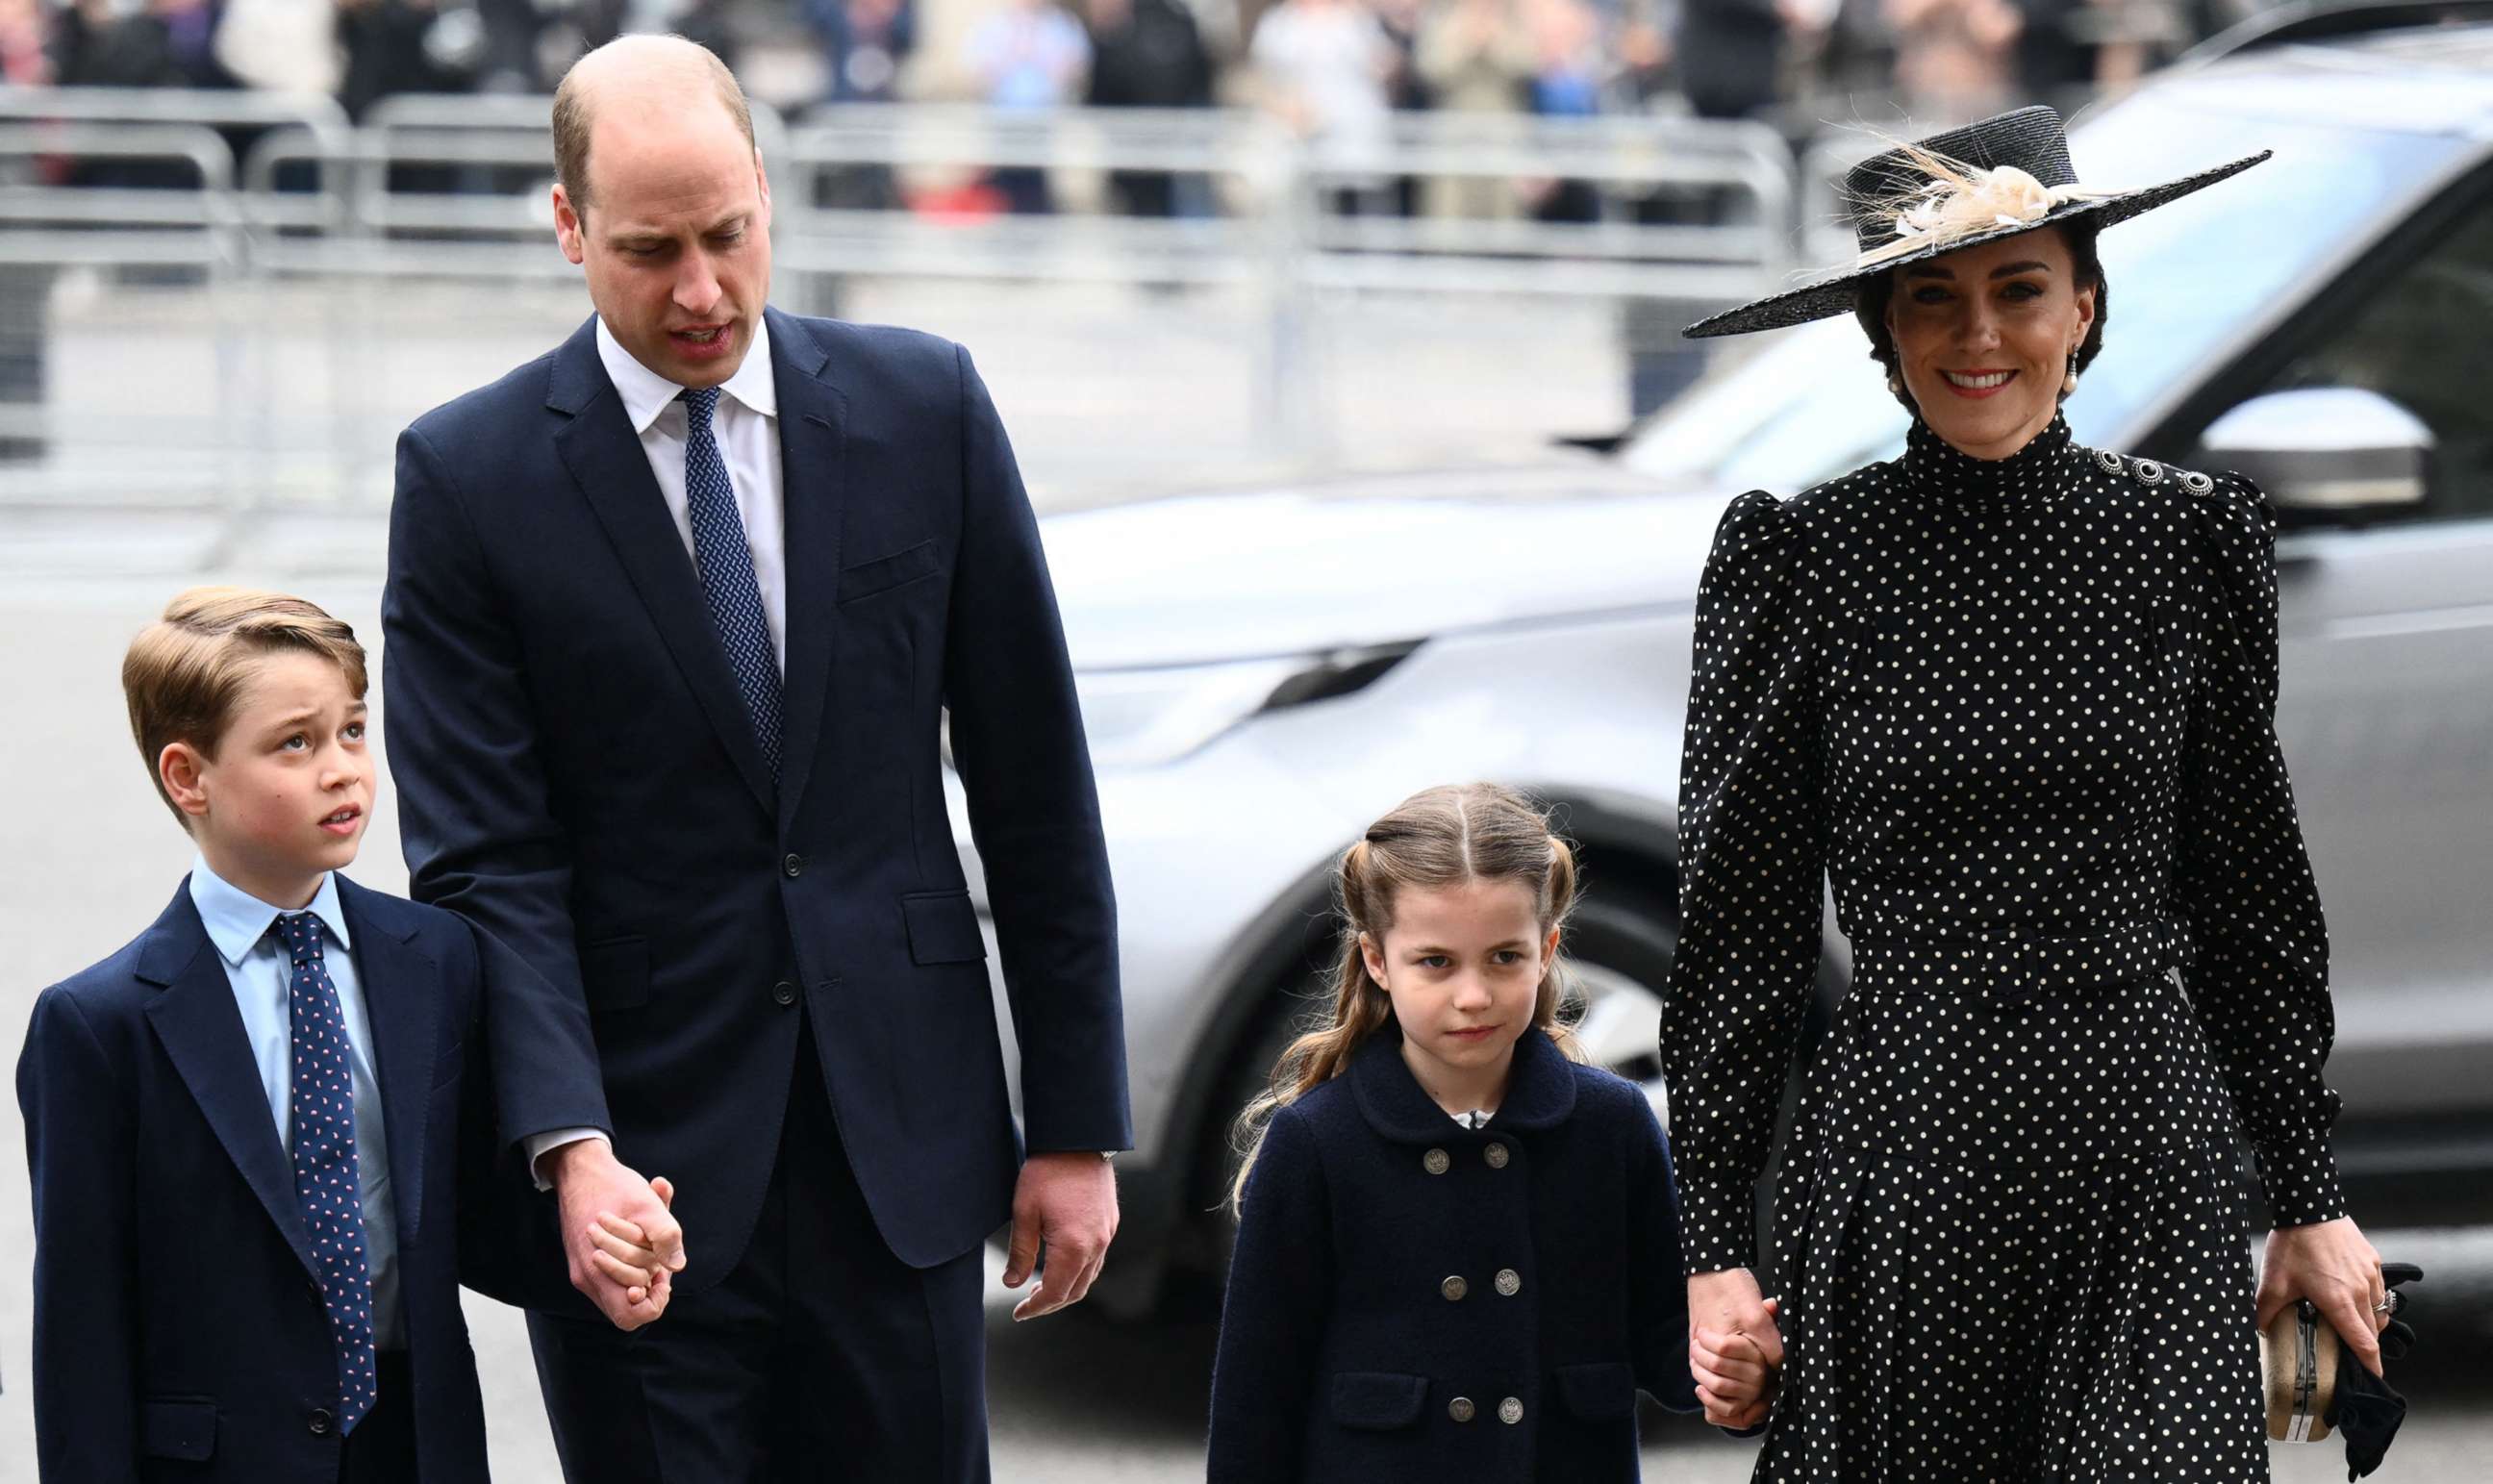 PHOTO: Prince William, Duke of Cambridge, Catherine, Duchess of Cambridge and their children arrive to attend a Service of Thanksgiving for Britain's Prince Philip, Duke of Edinburgh, at Westminster Abbey in central London, March 29, 2022.